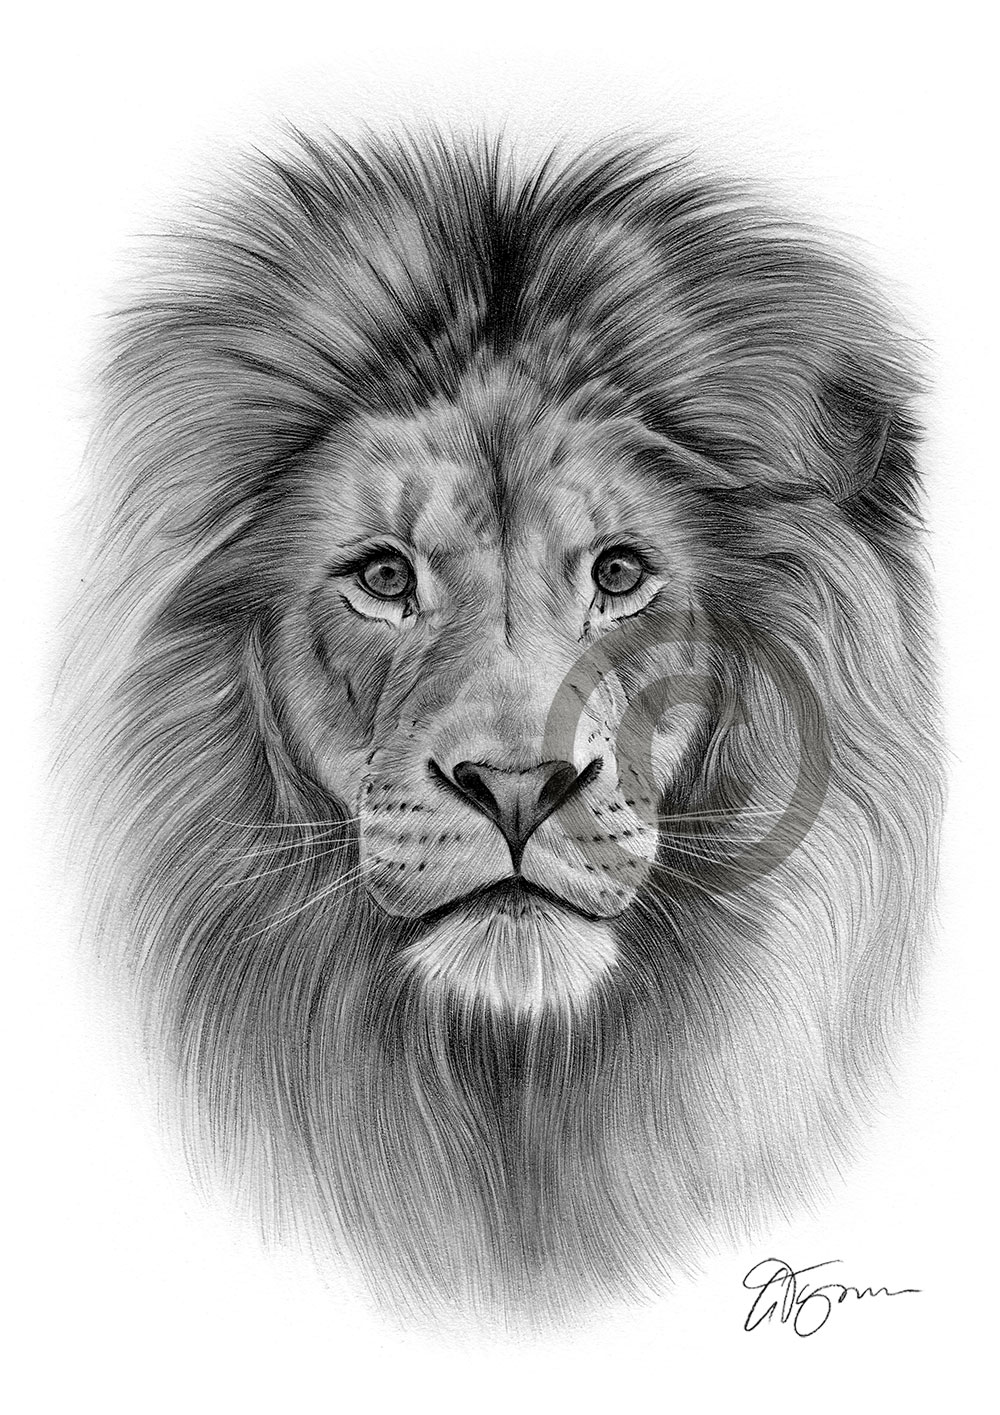 Creative Sketch Lion Pencil Drawing for Girl